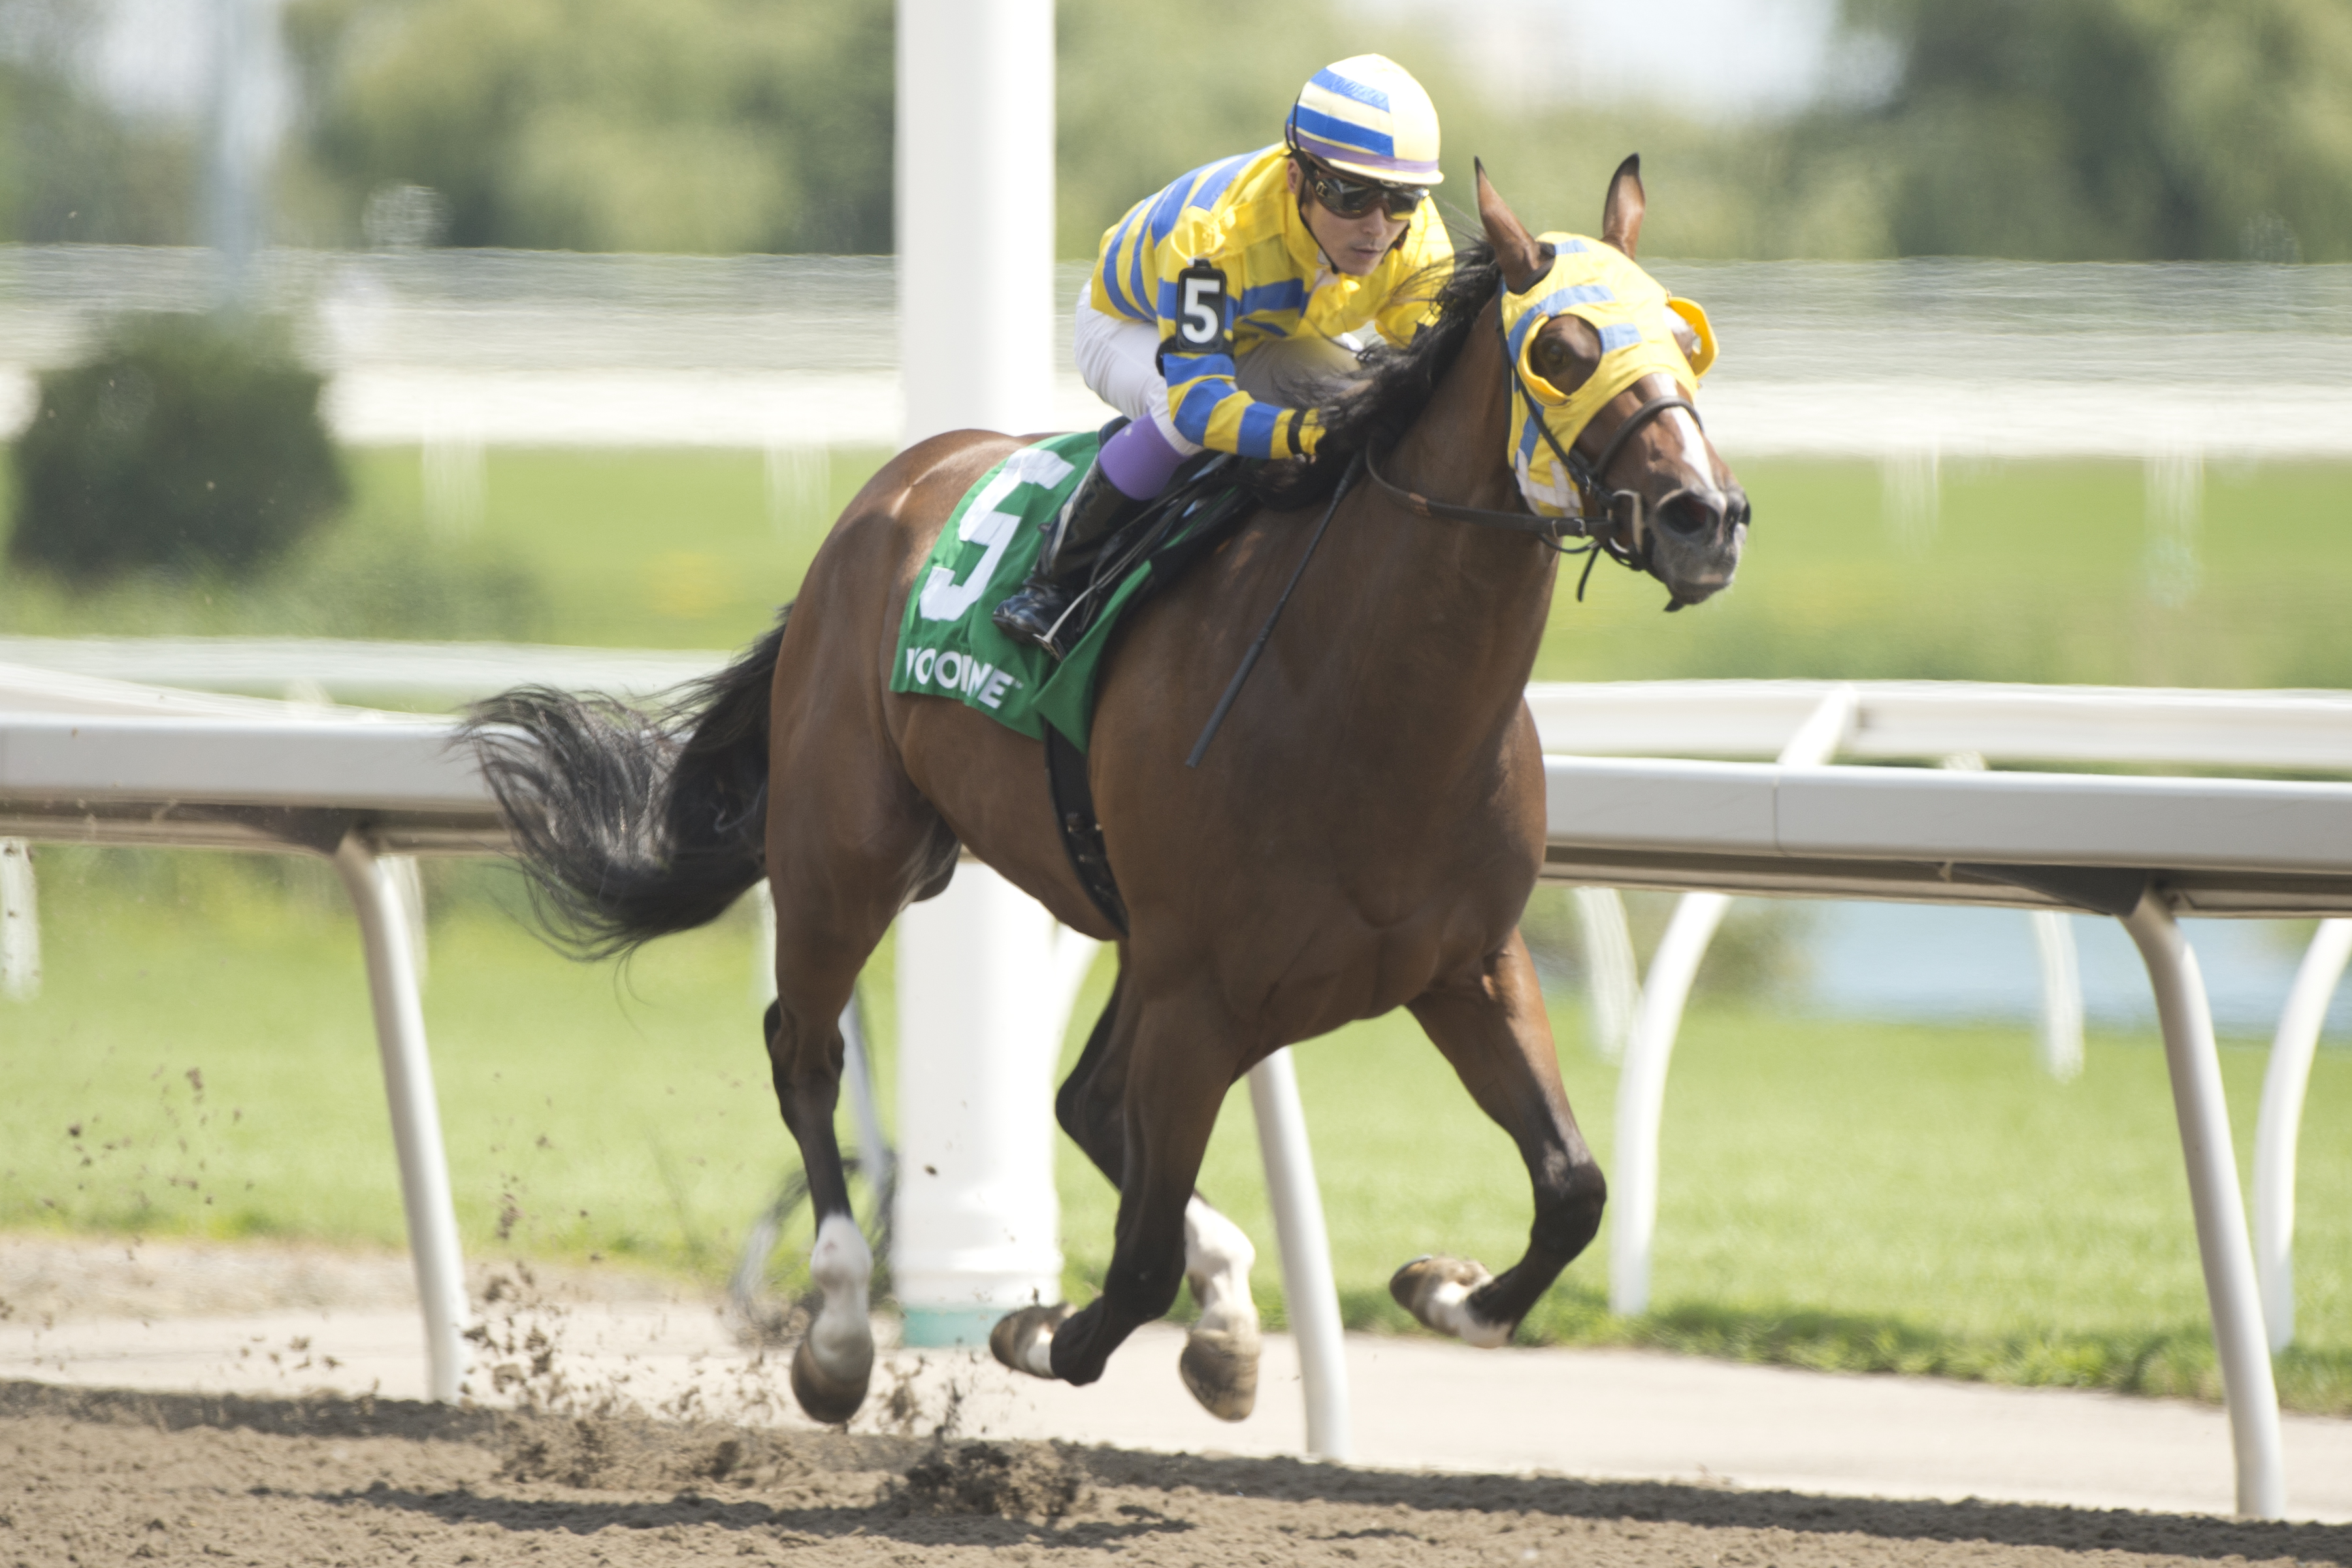 Patches O’Houlihan Rides the Wave to an Easy Lake Superior Score